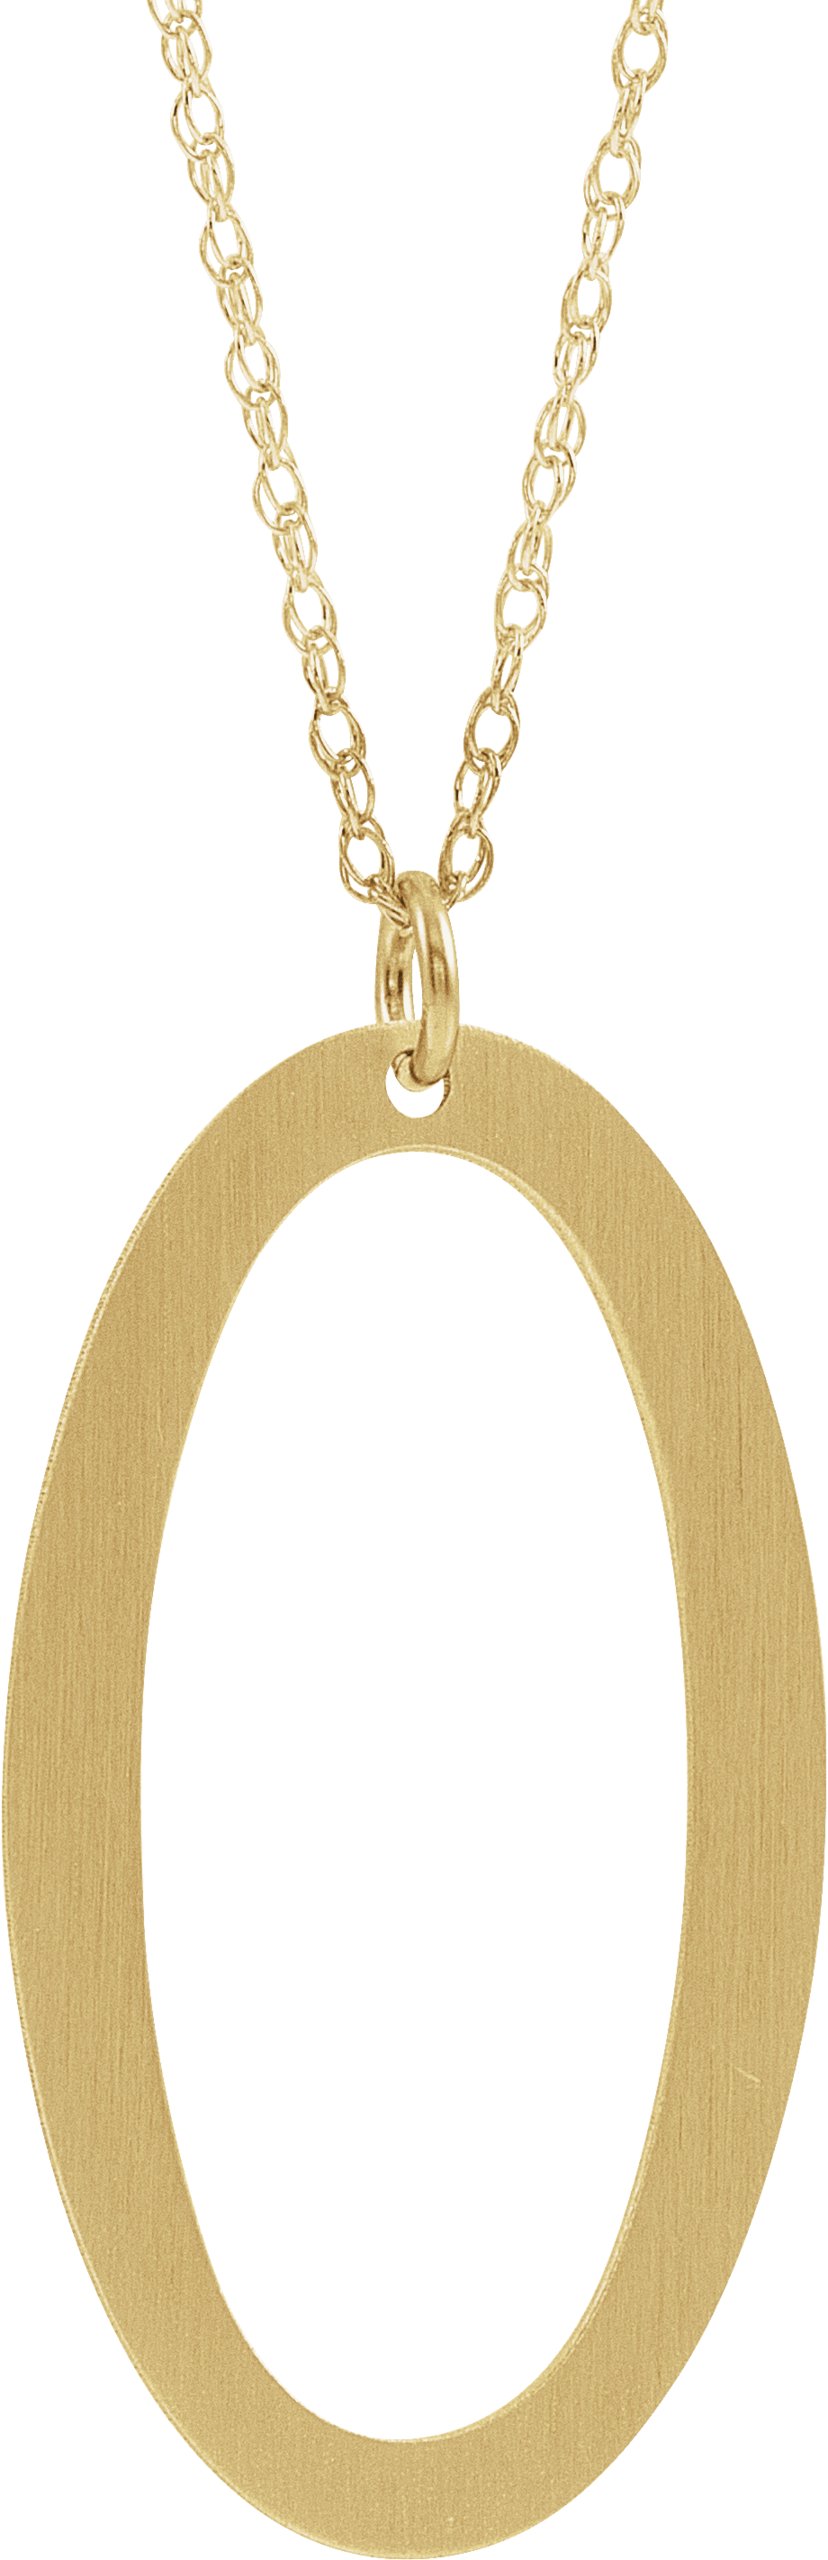 14K Yellow Gold-Plated Sterling Silver Block Initial O 16-18" Necklace with Brush Finish